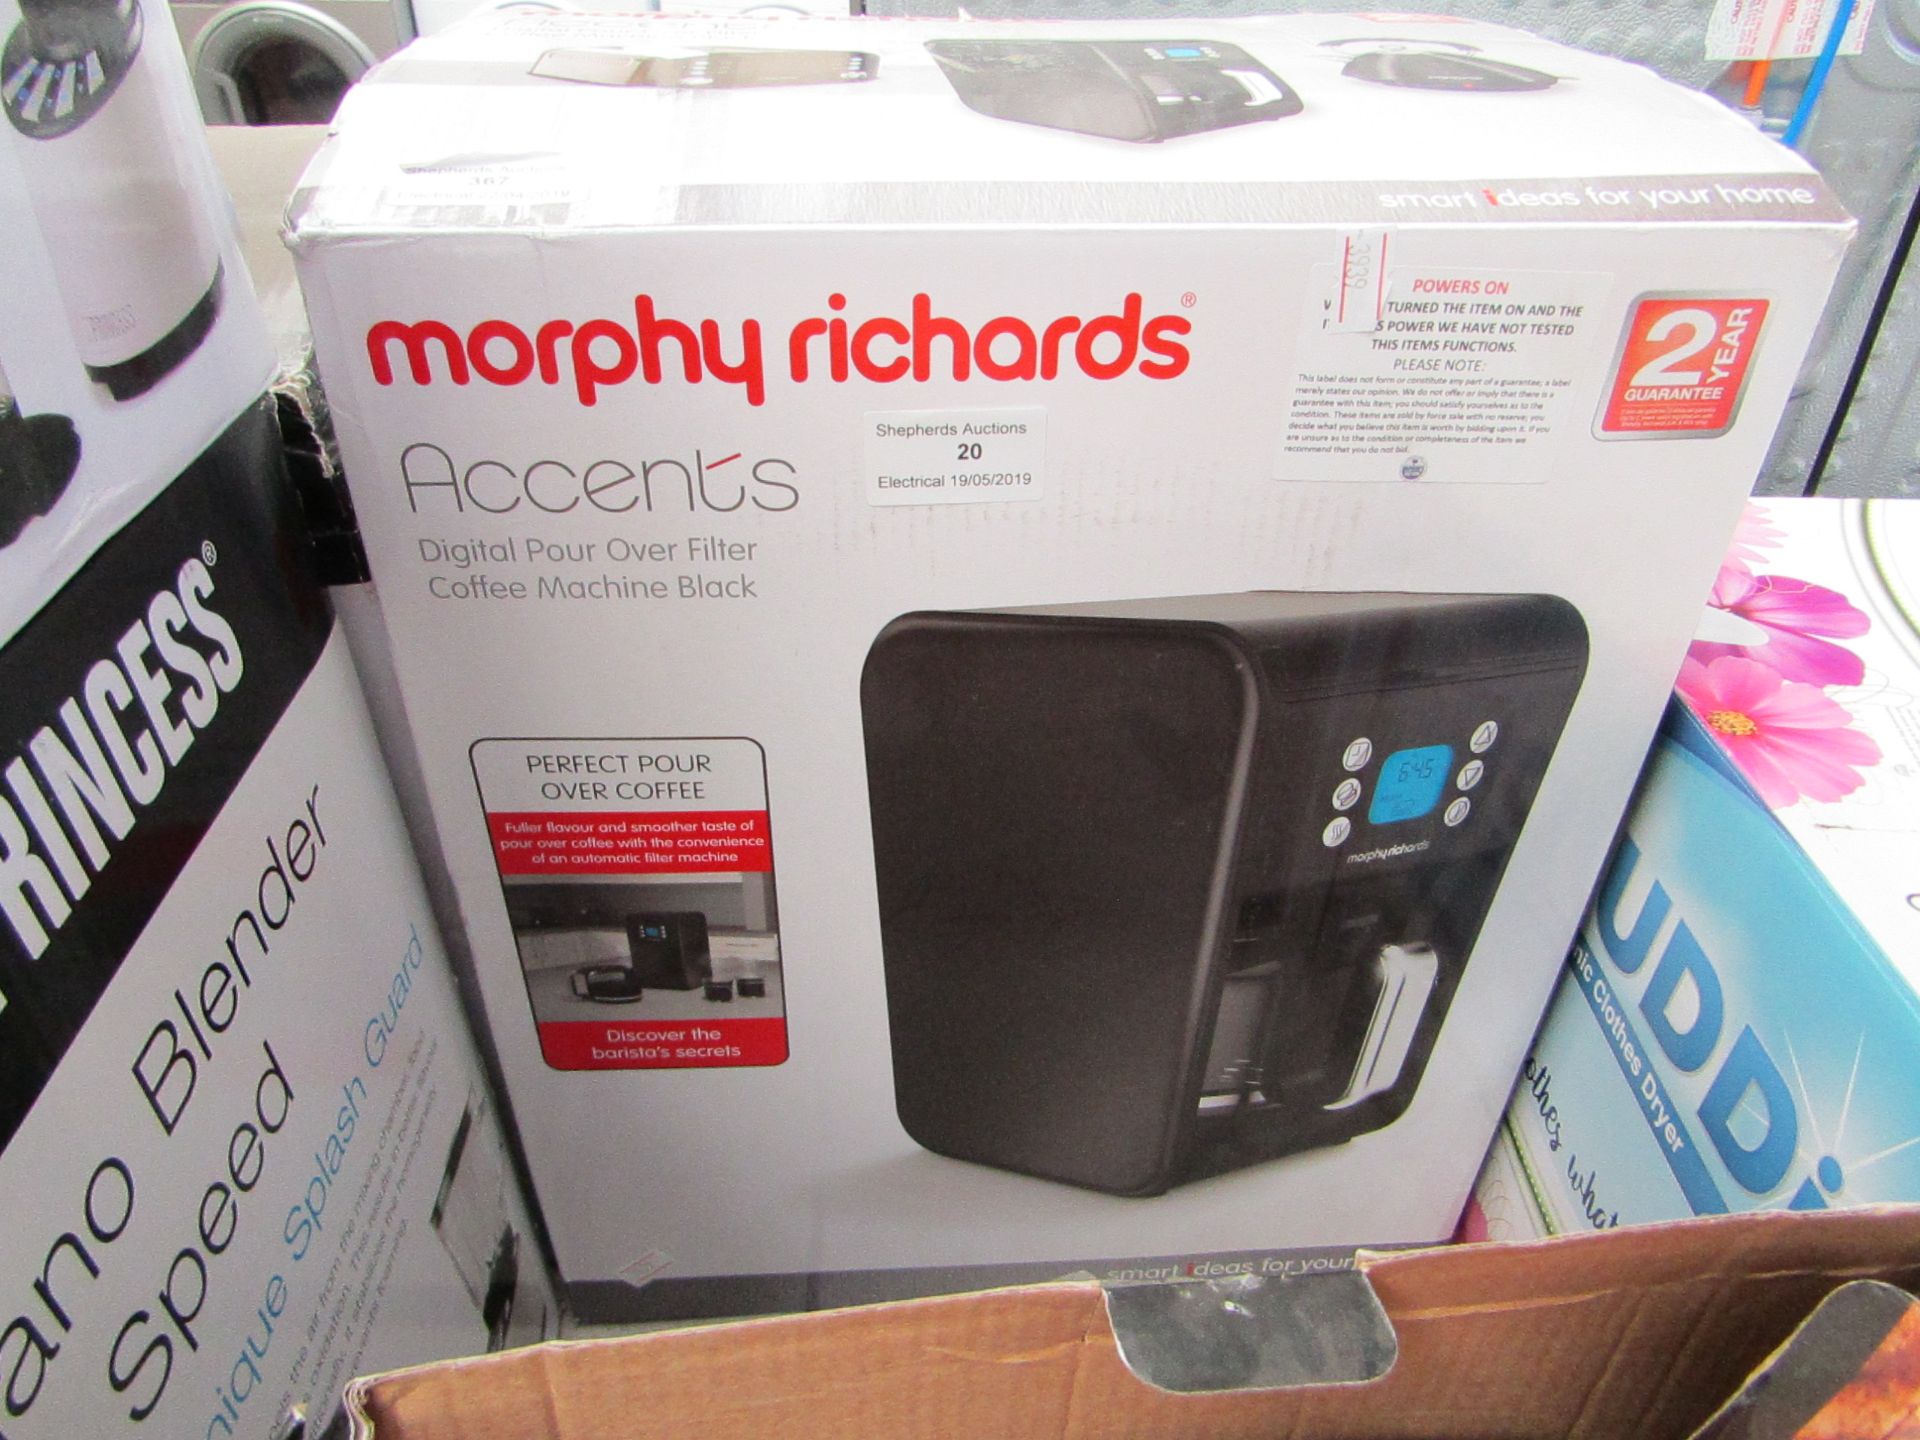 Morphy Richards Accents Coffee Machine, Powers On & Boxed